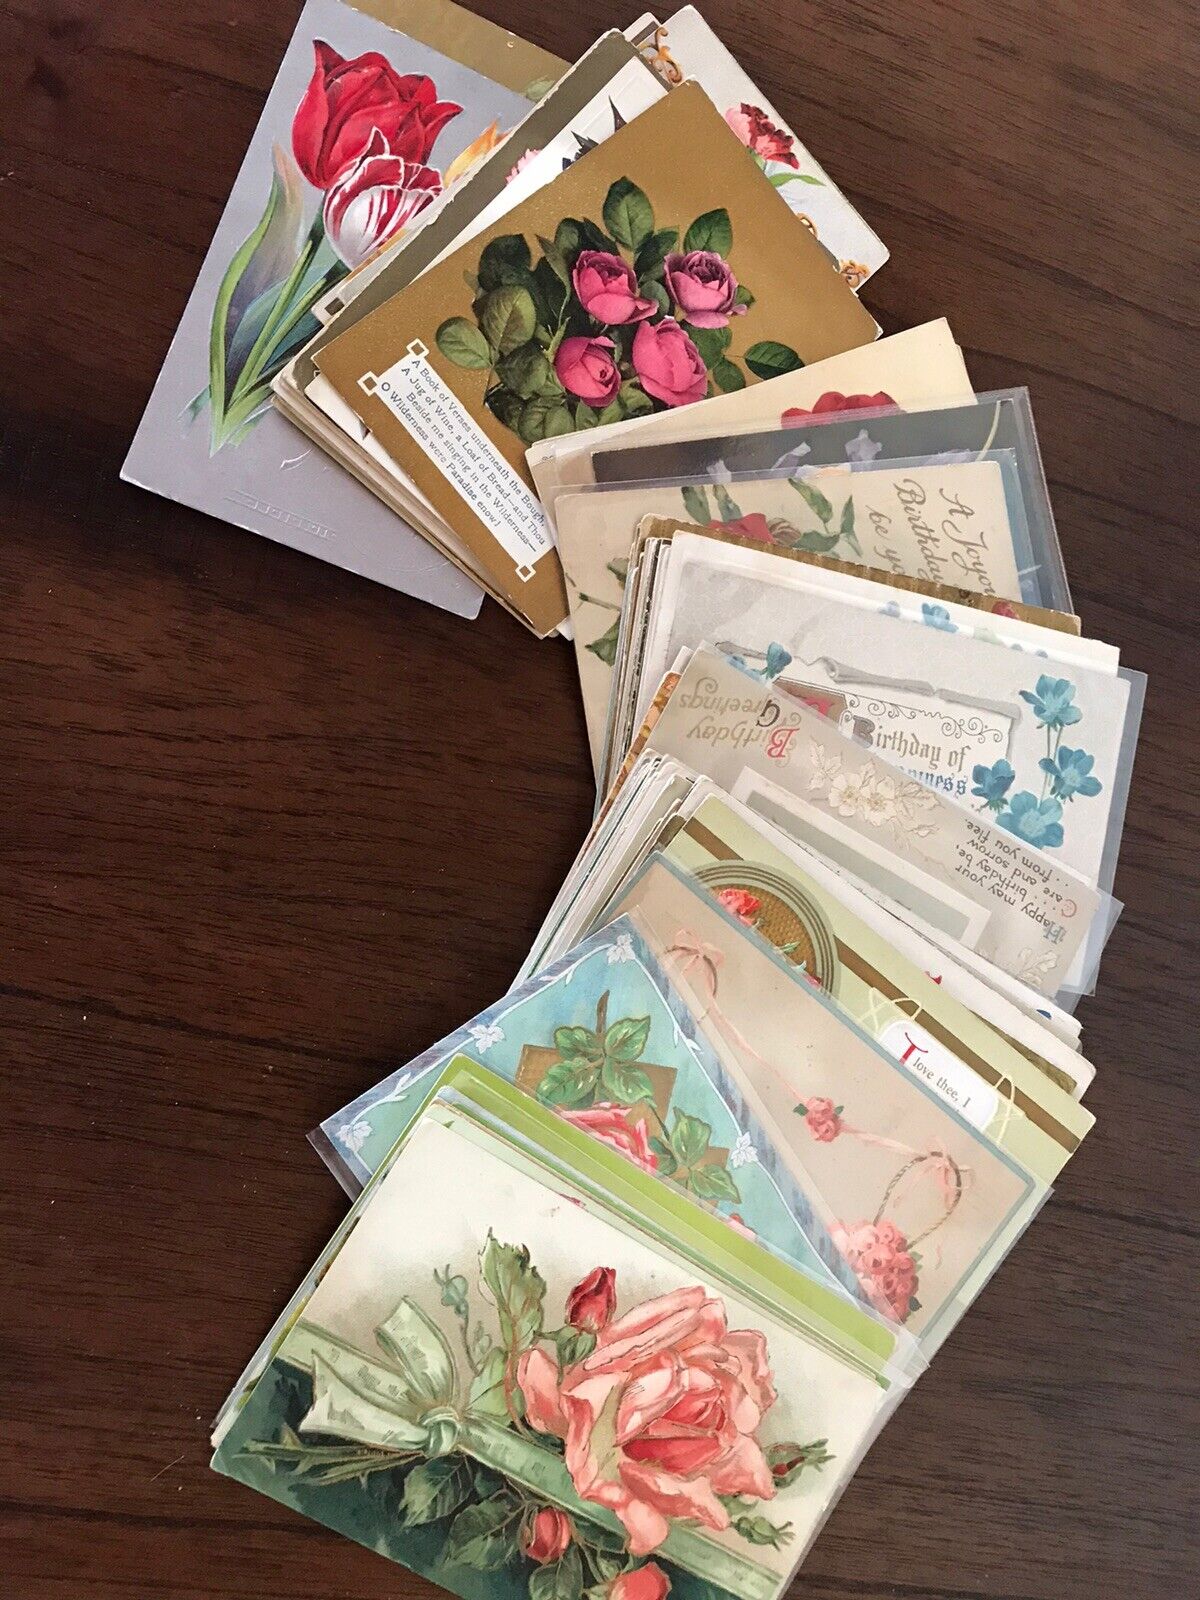 Lot of 25 Vintage 1900’s Greetings Postcards ~Antique-In Sleeves~Free Shipping! Без бренда - фотография #4